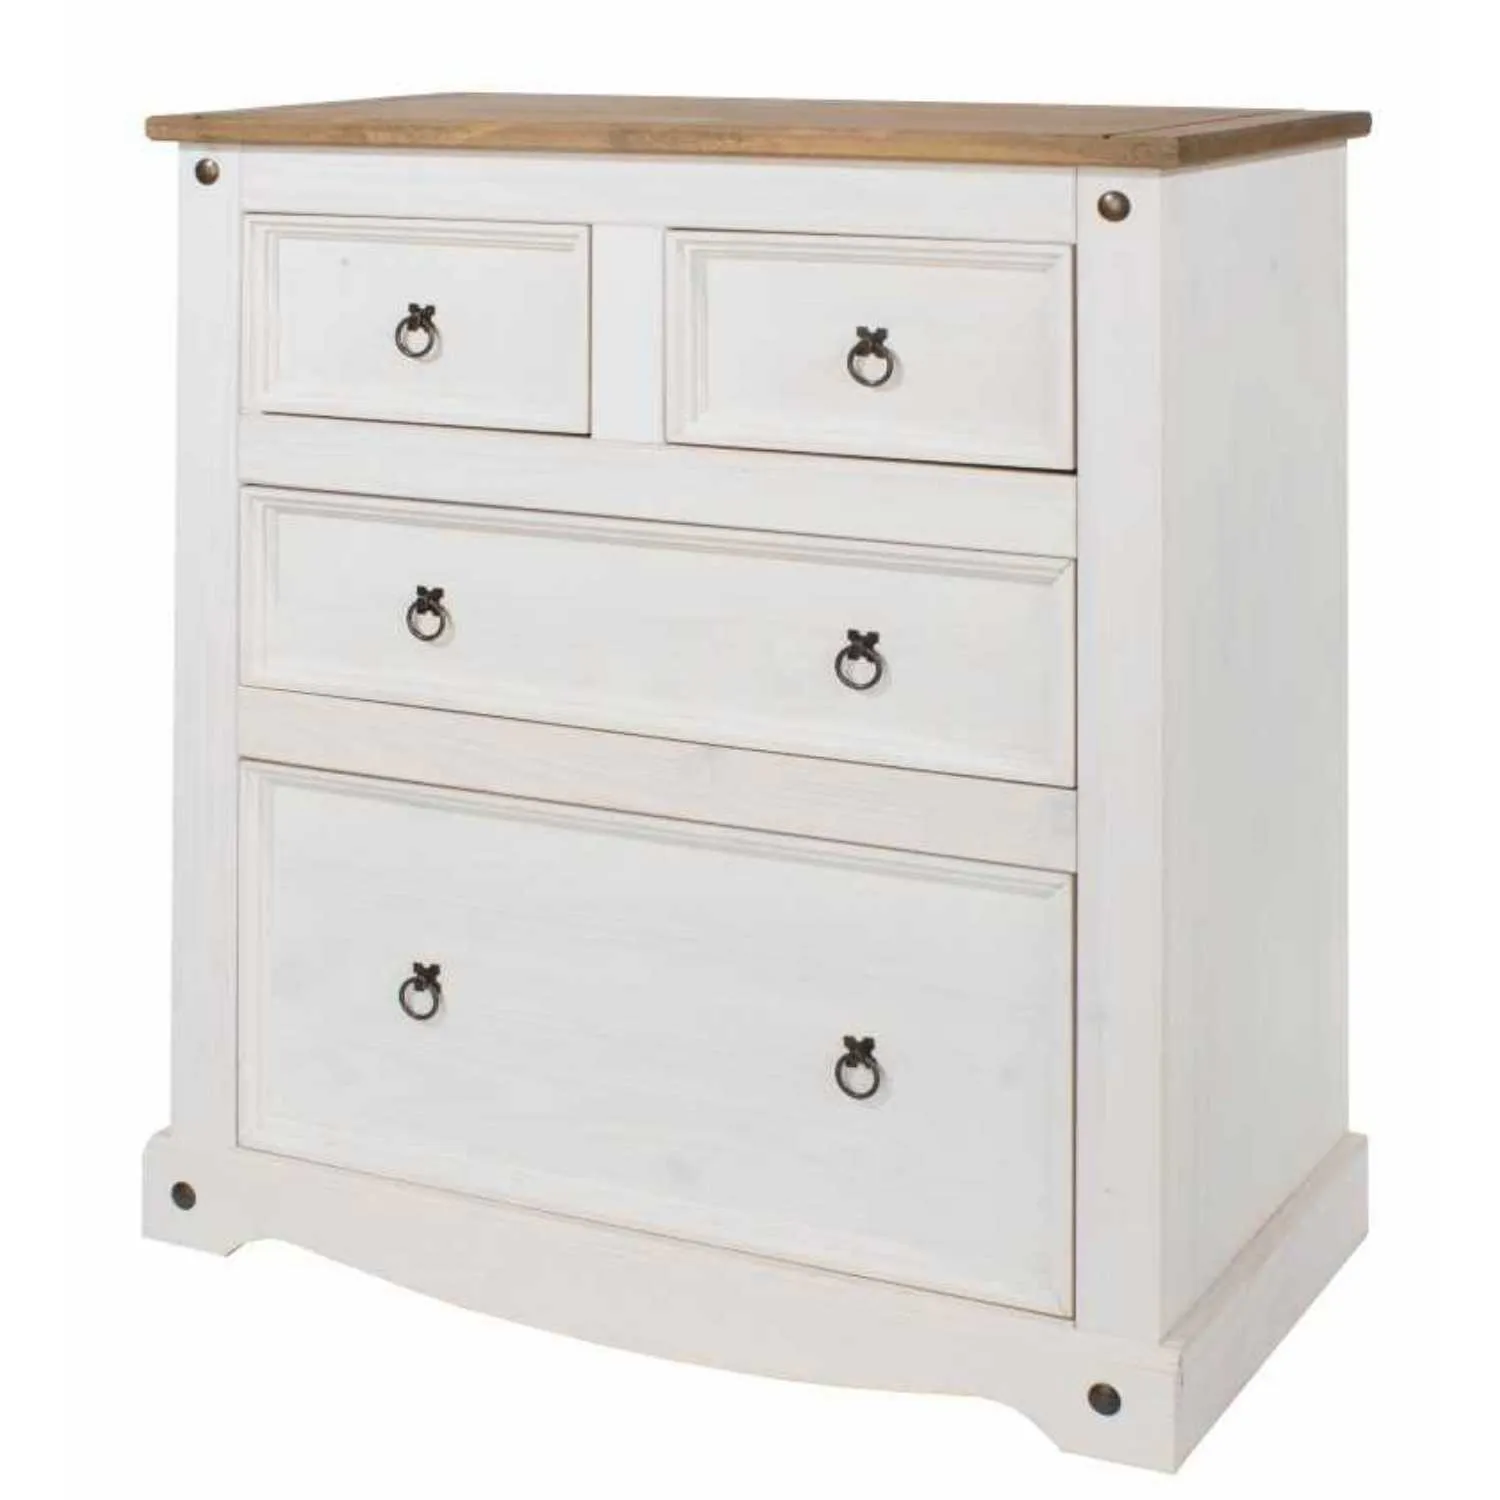 White Painted Antique Wax Finish Oak Top Chest of 4 Drawers 2 Over 2 Mexican Design